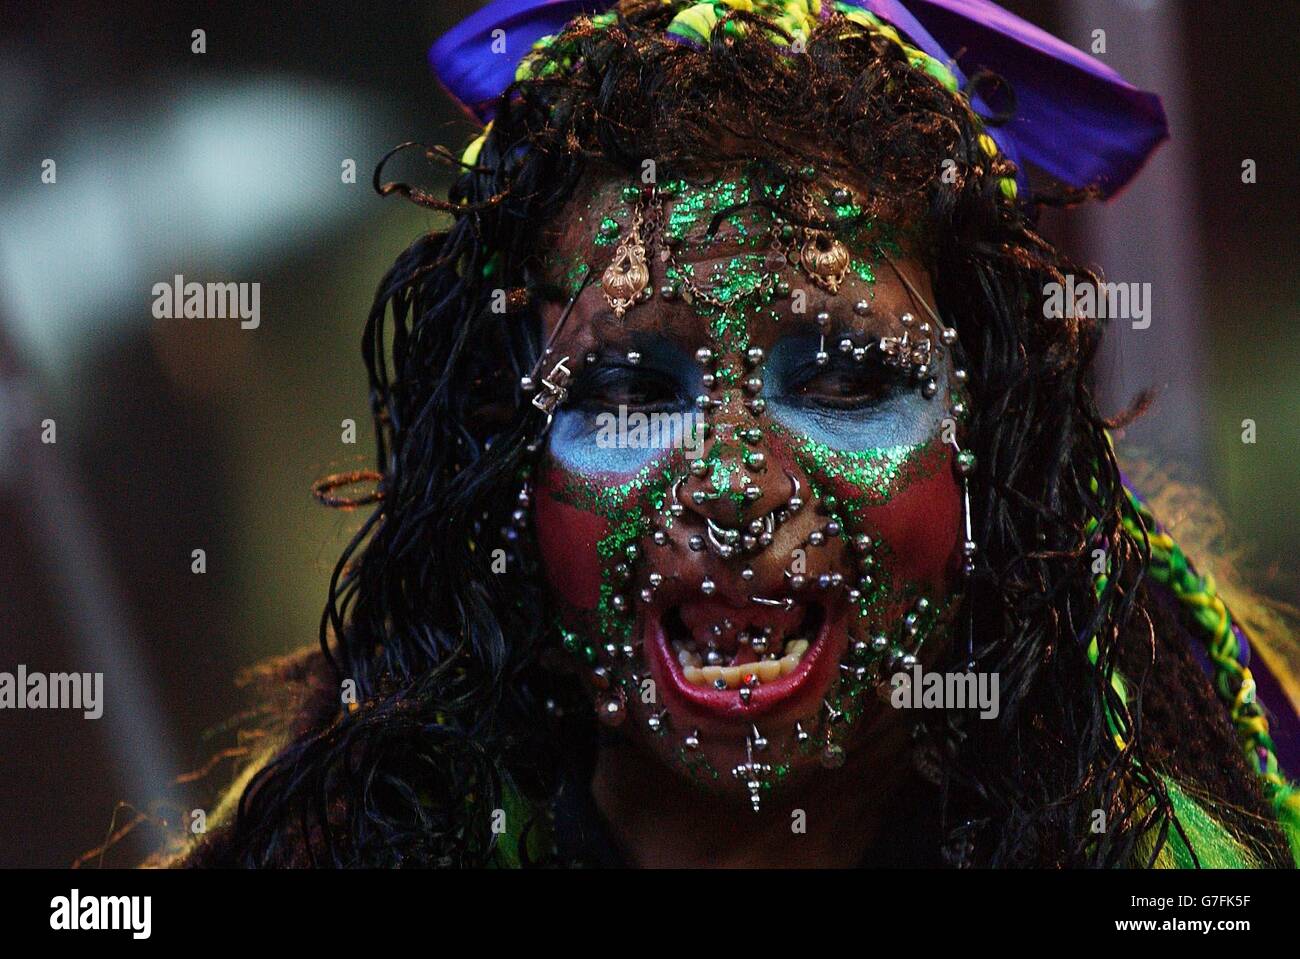 Elaine Davidson - the world's most pierced woman - during her guest appearance on MTV's TRL - Total Request Live - show at their new studios in Leicester Square, central London. Stock Photo